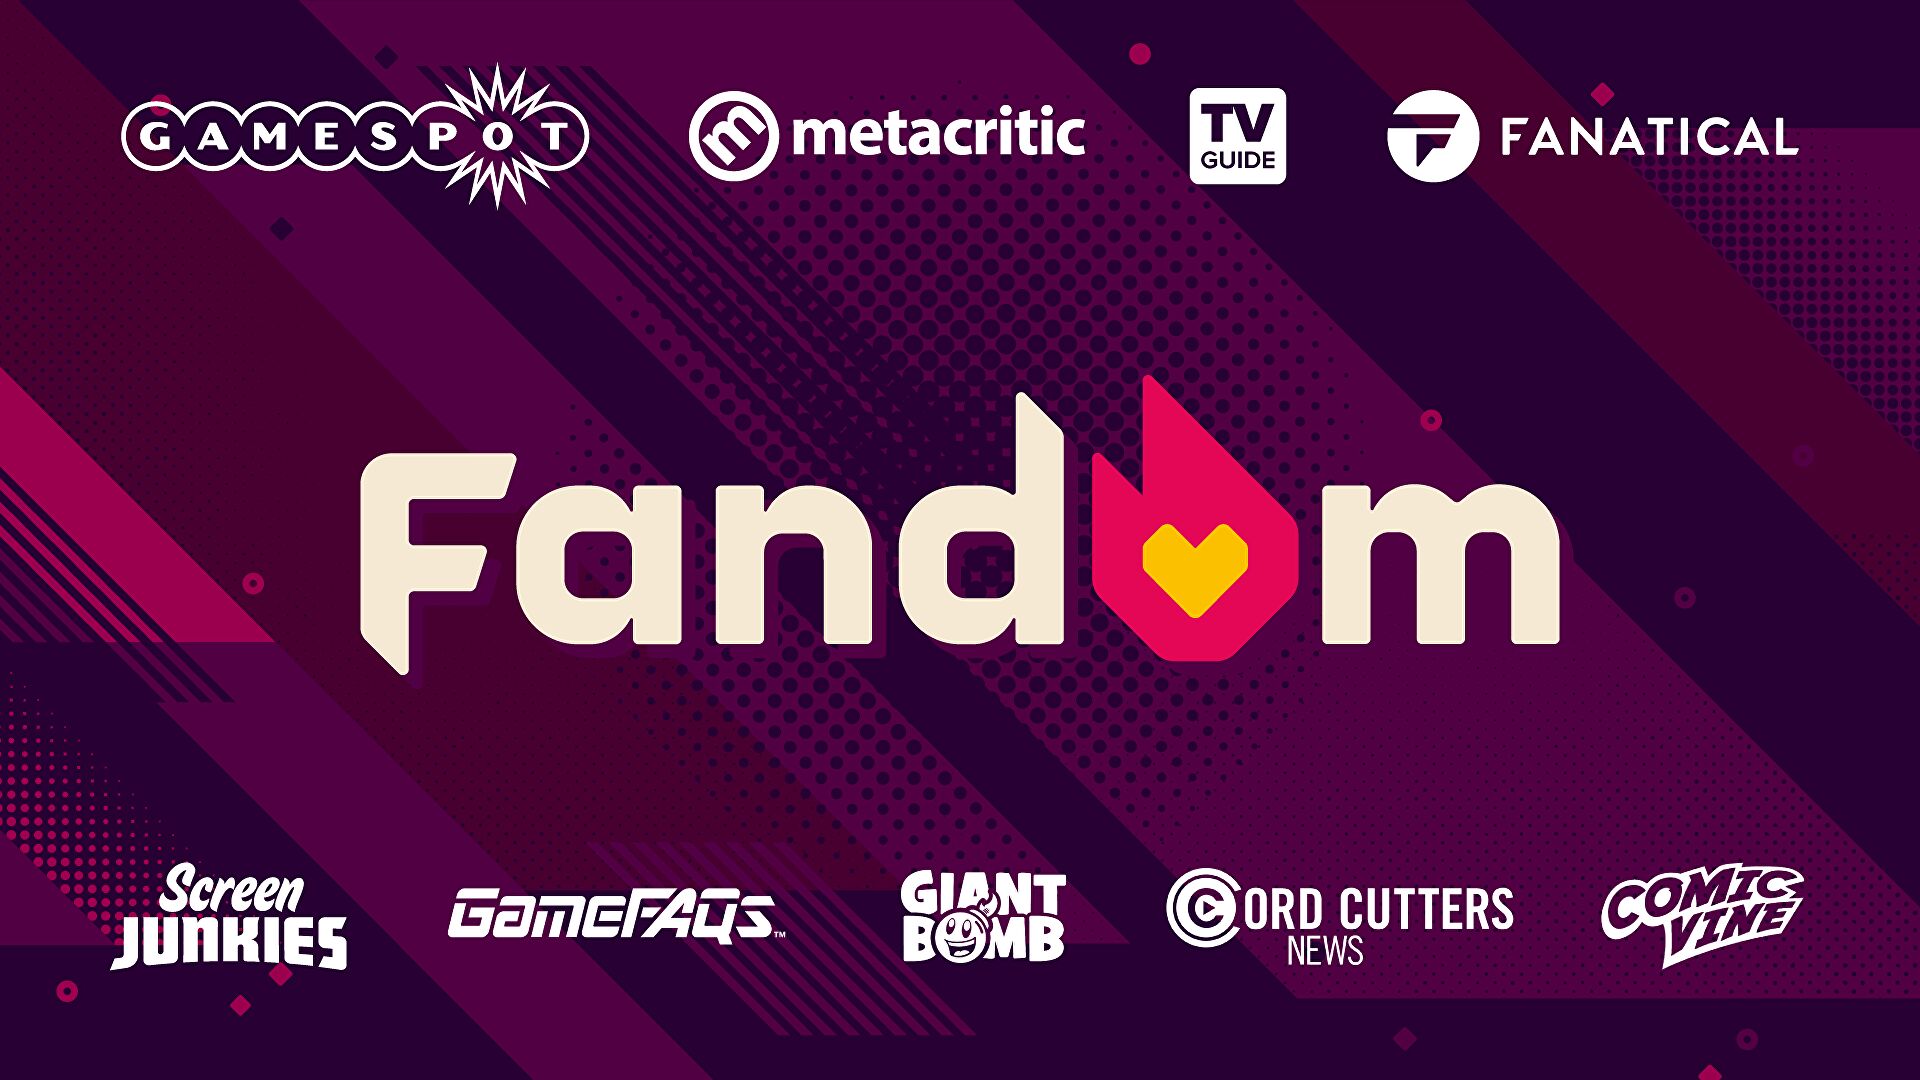 Fandom just bought GameSpot, Metacritic, Giant Bomb and more